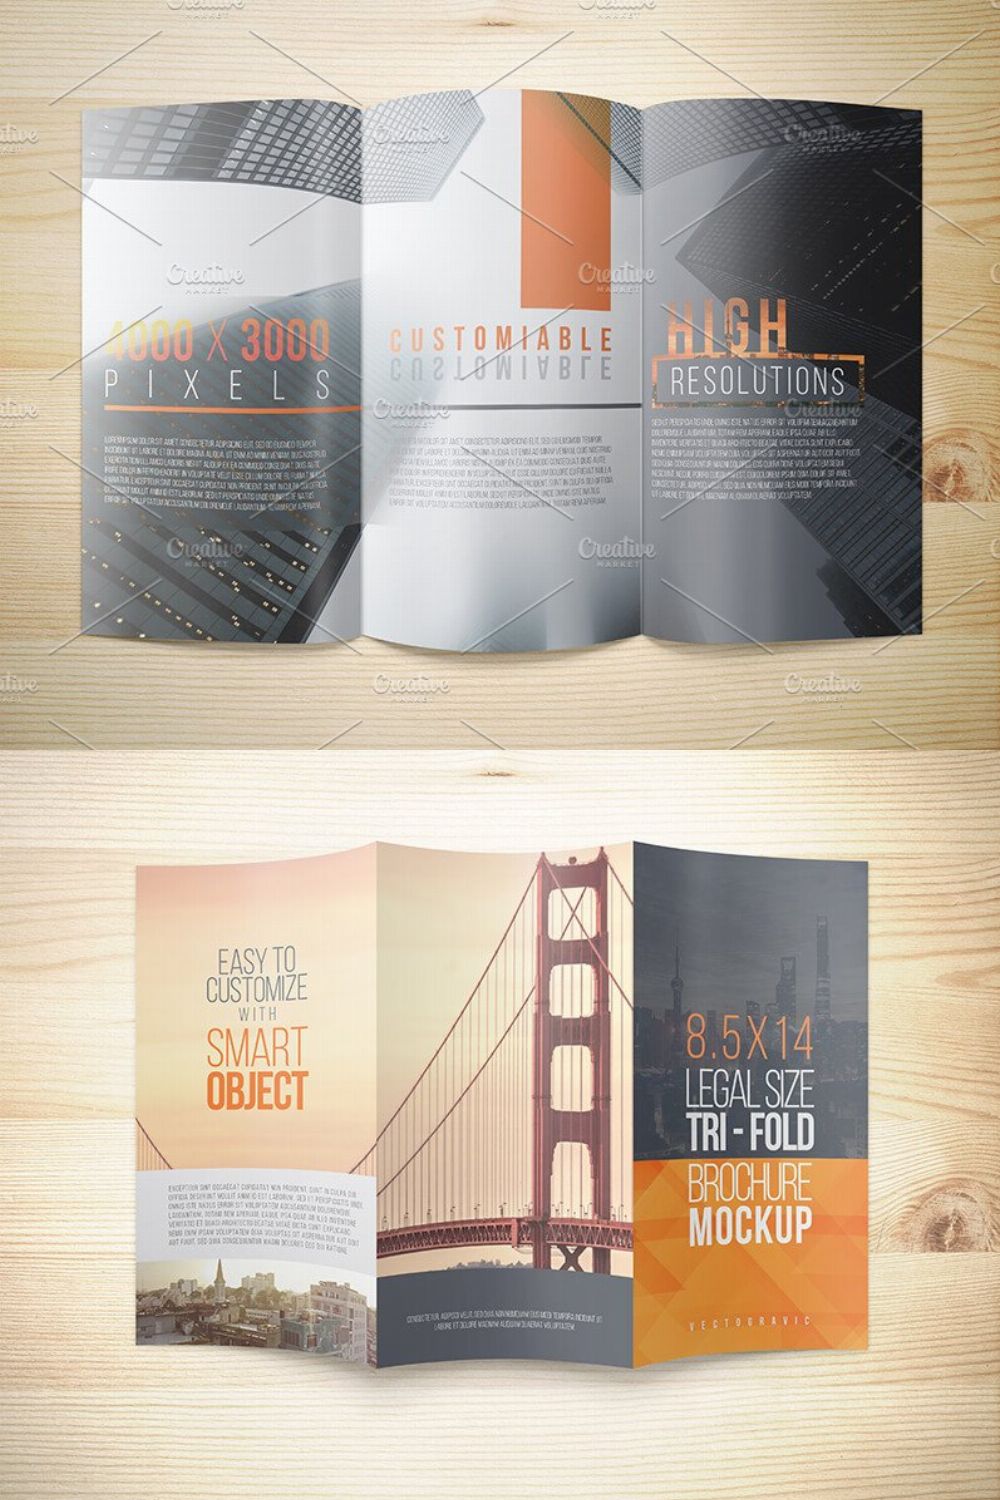 8.5x14 Legal Trifold Brochure Mockup pinterest preview image.